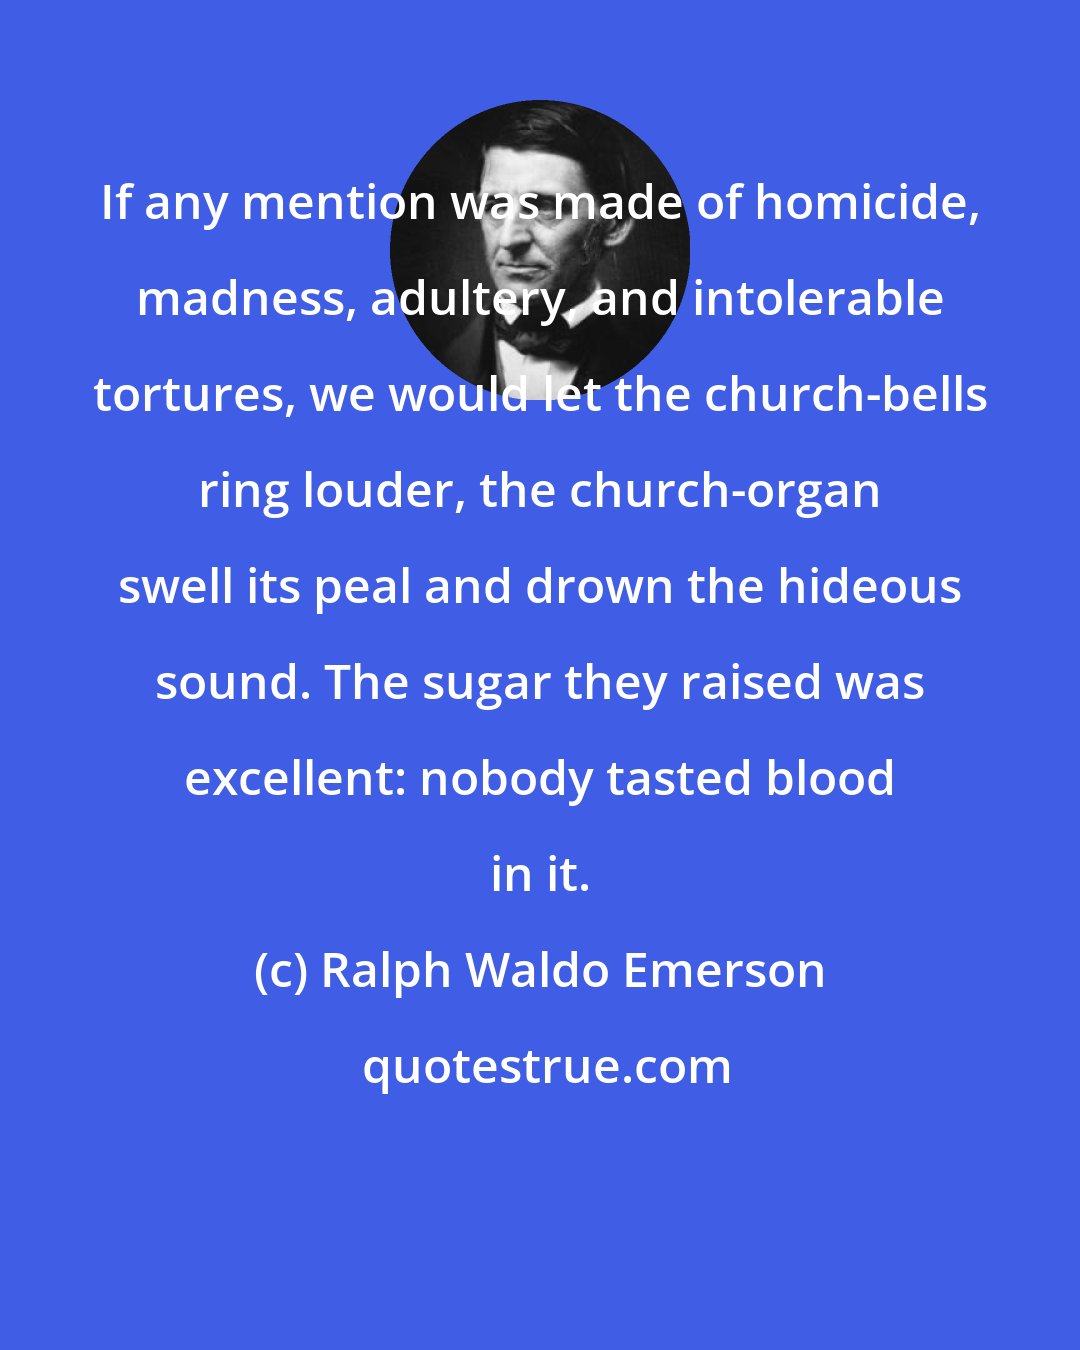 Ralph Waldo Emerson: If any mention was made of homicide, madness, adultery, and intolerable tortures, we would let the church-bells ring louder, the church-organ swell its peal and drown the hideous sound. The sugar they raised was excellent: nobody tasted blood in it.